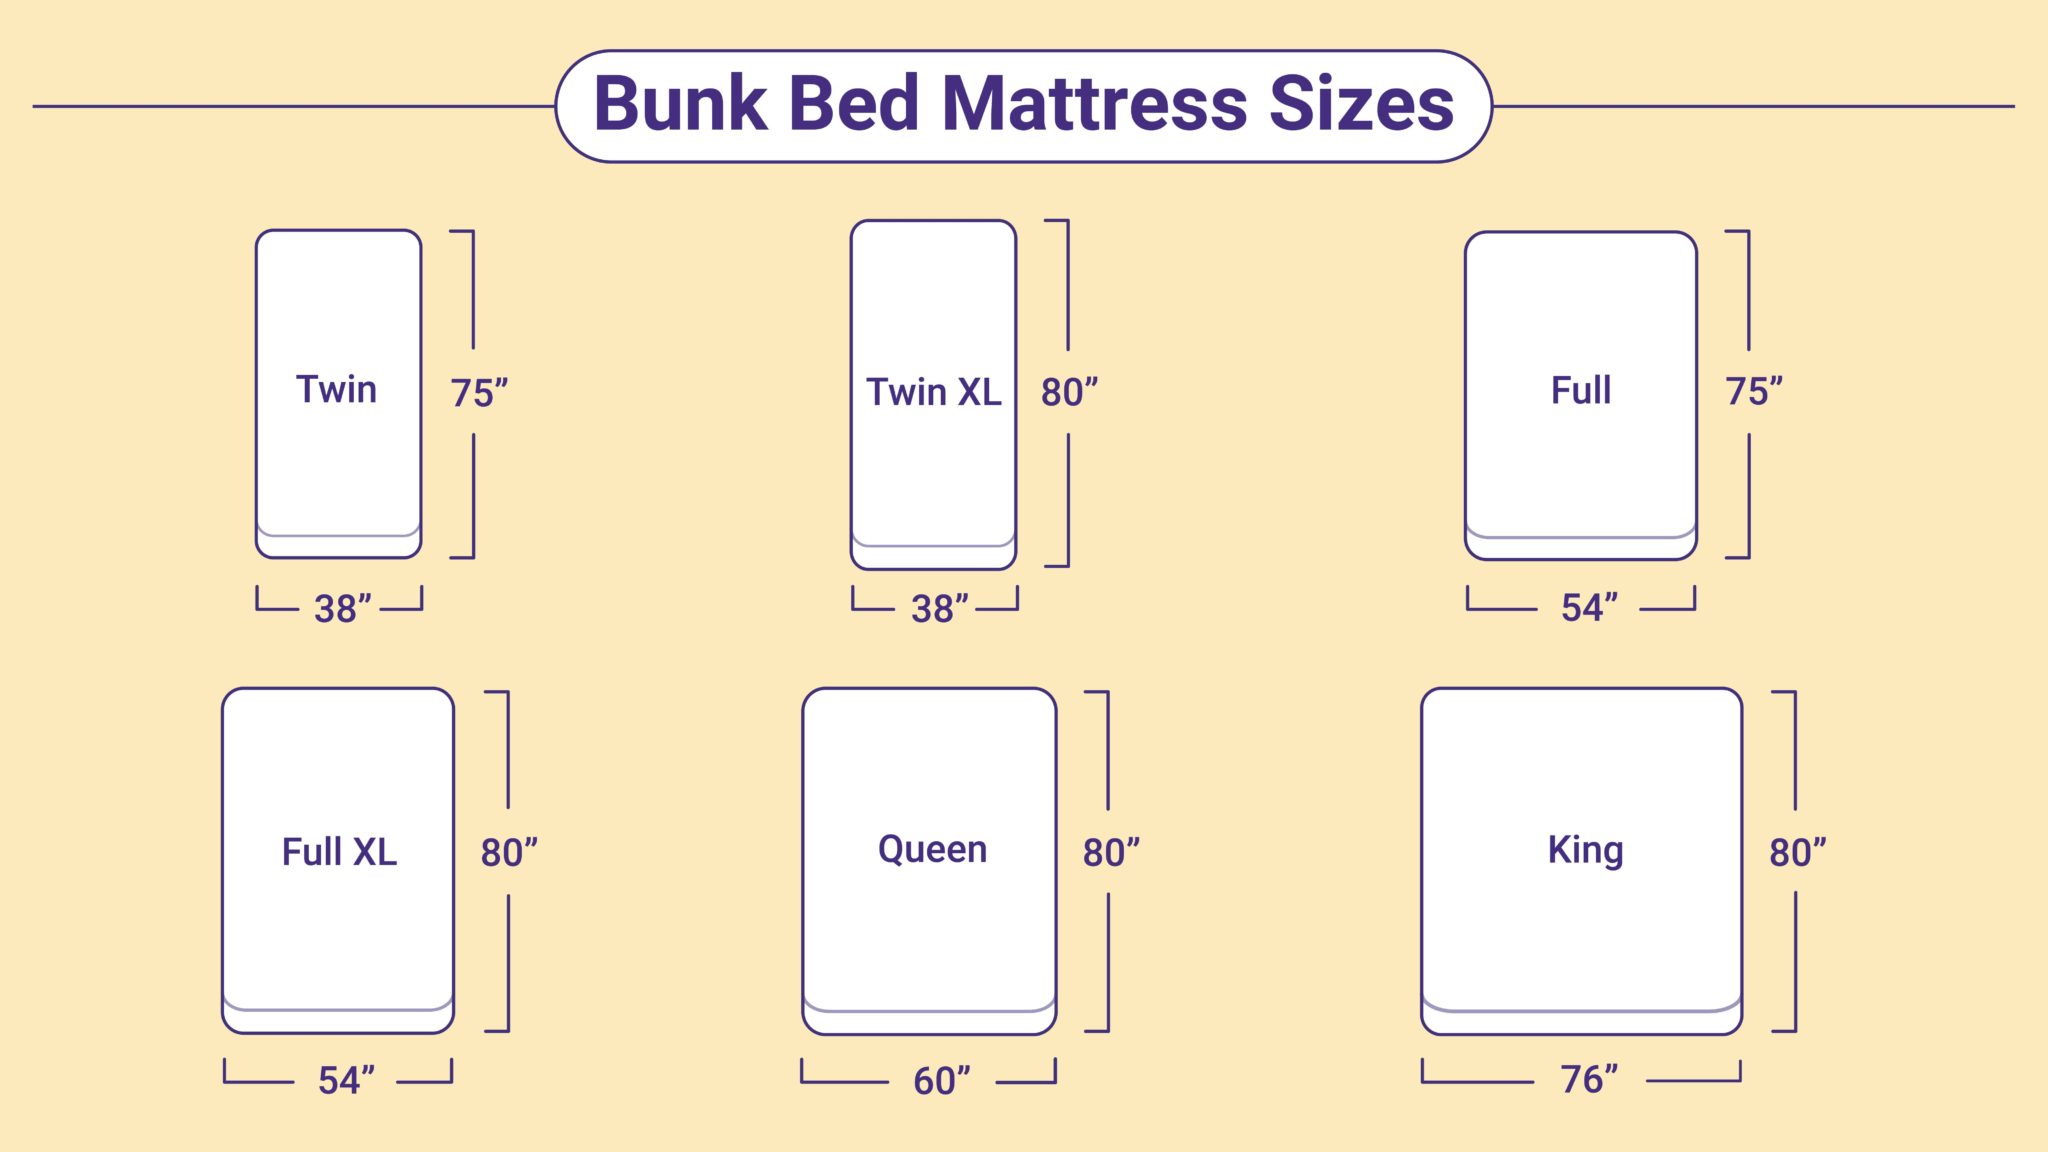 bed sheets for 6 mattresses